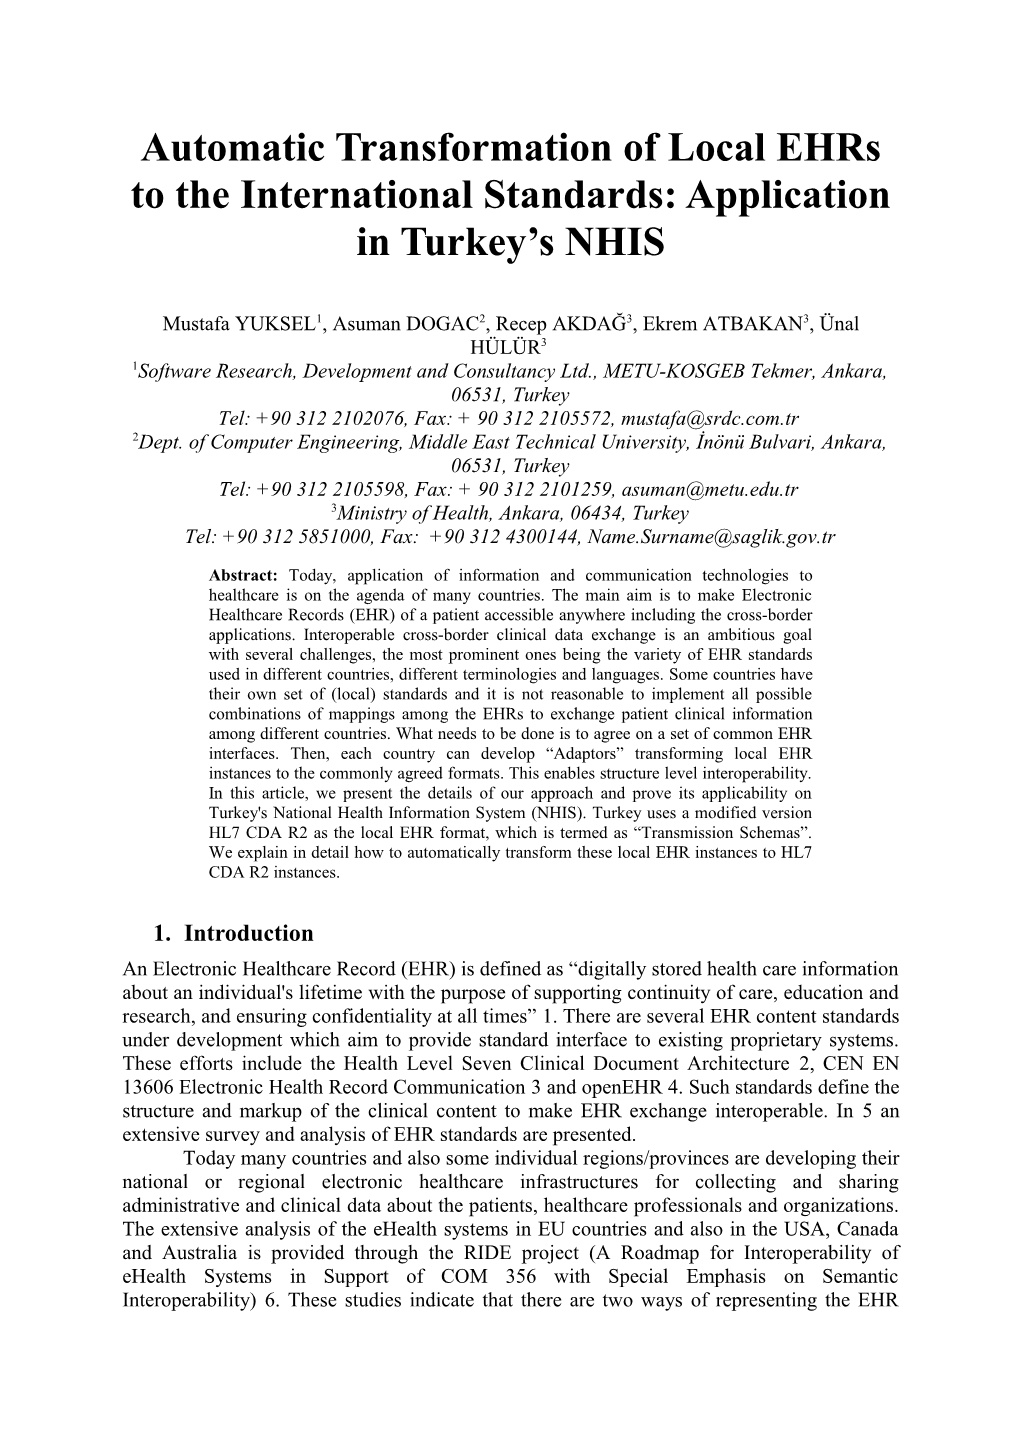 Design and Implementation of the Einvoice Profile of the Revenue Administration of Turkey